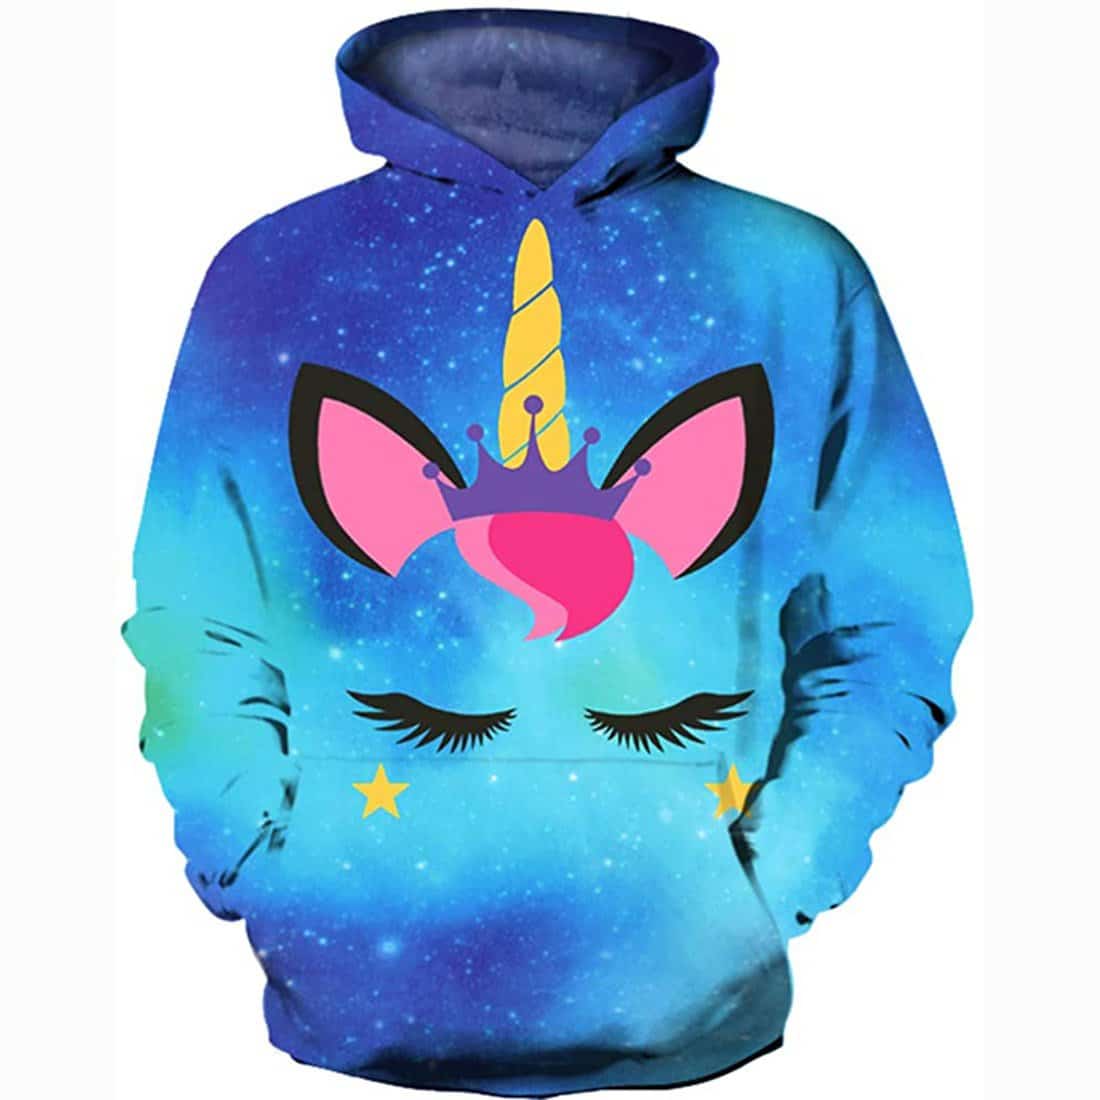 3D Print Realistic Blue Galaxy Unicorn Face Pullover Hoodie Hooded Sweatshirt for Kids